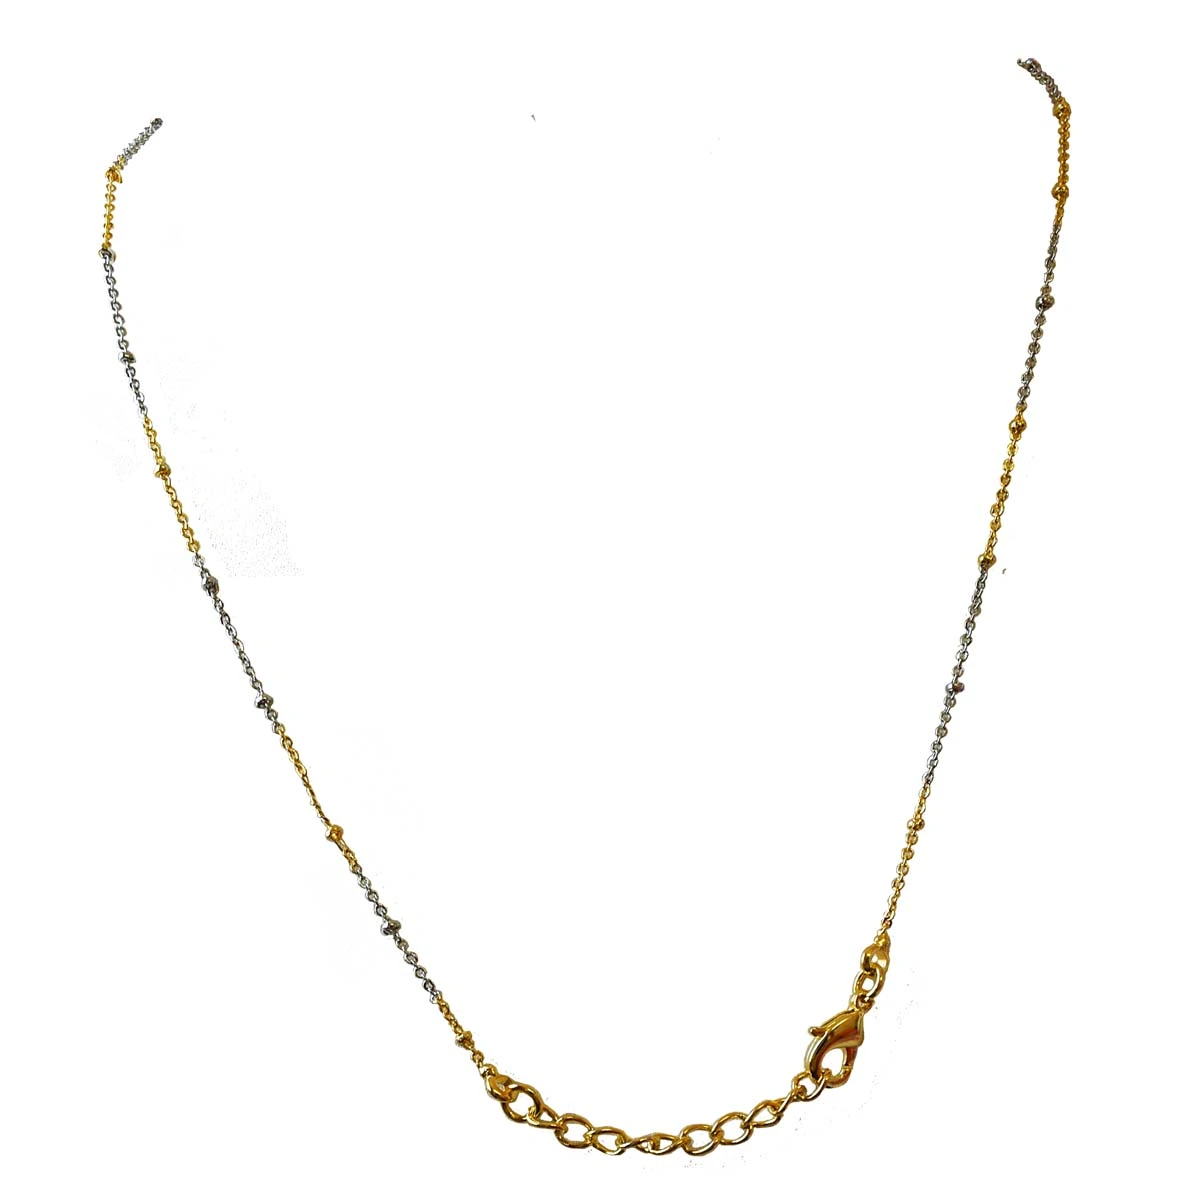 Round Shaped Gold & Silver Plated Pendant Chain with Earrings (SDS321)